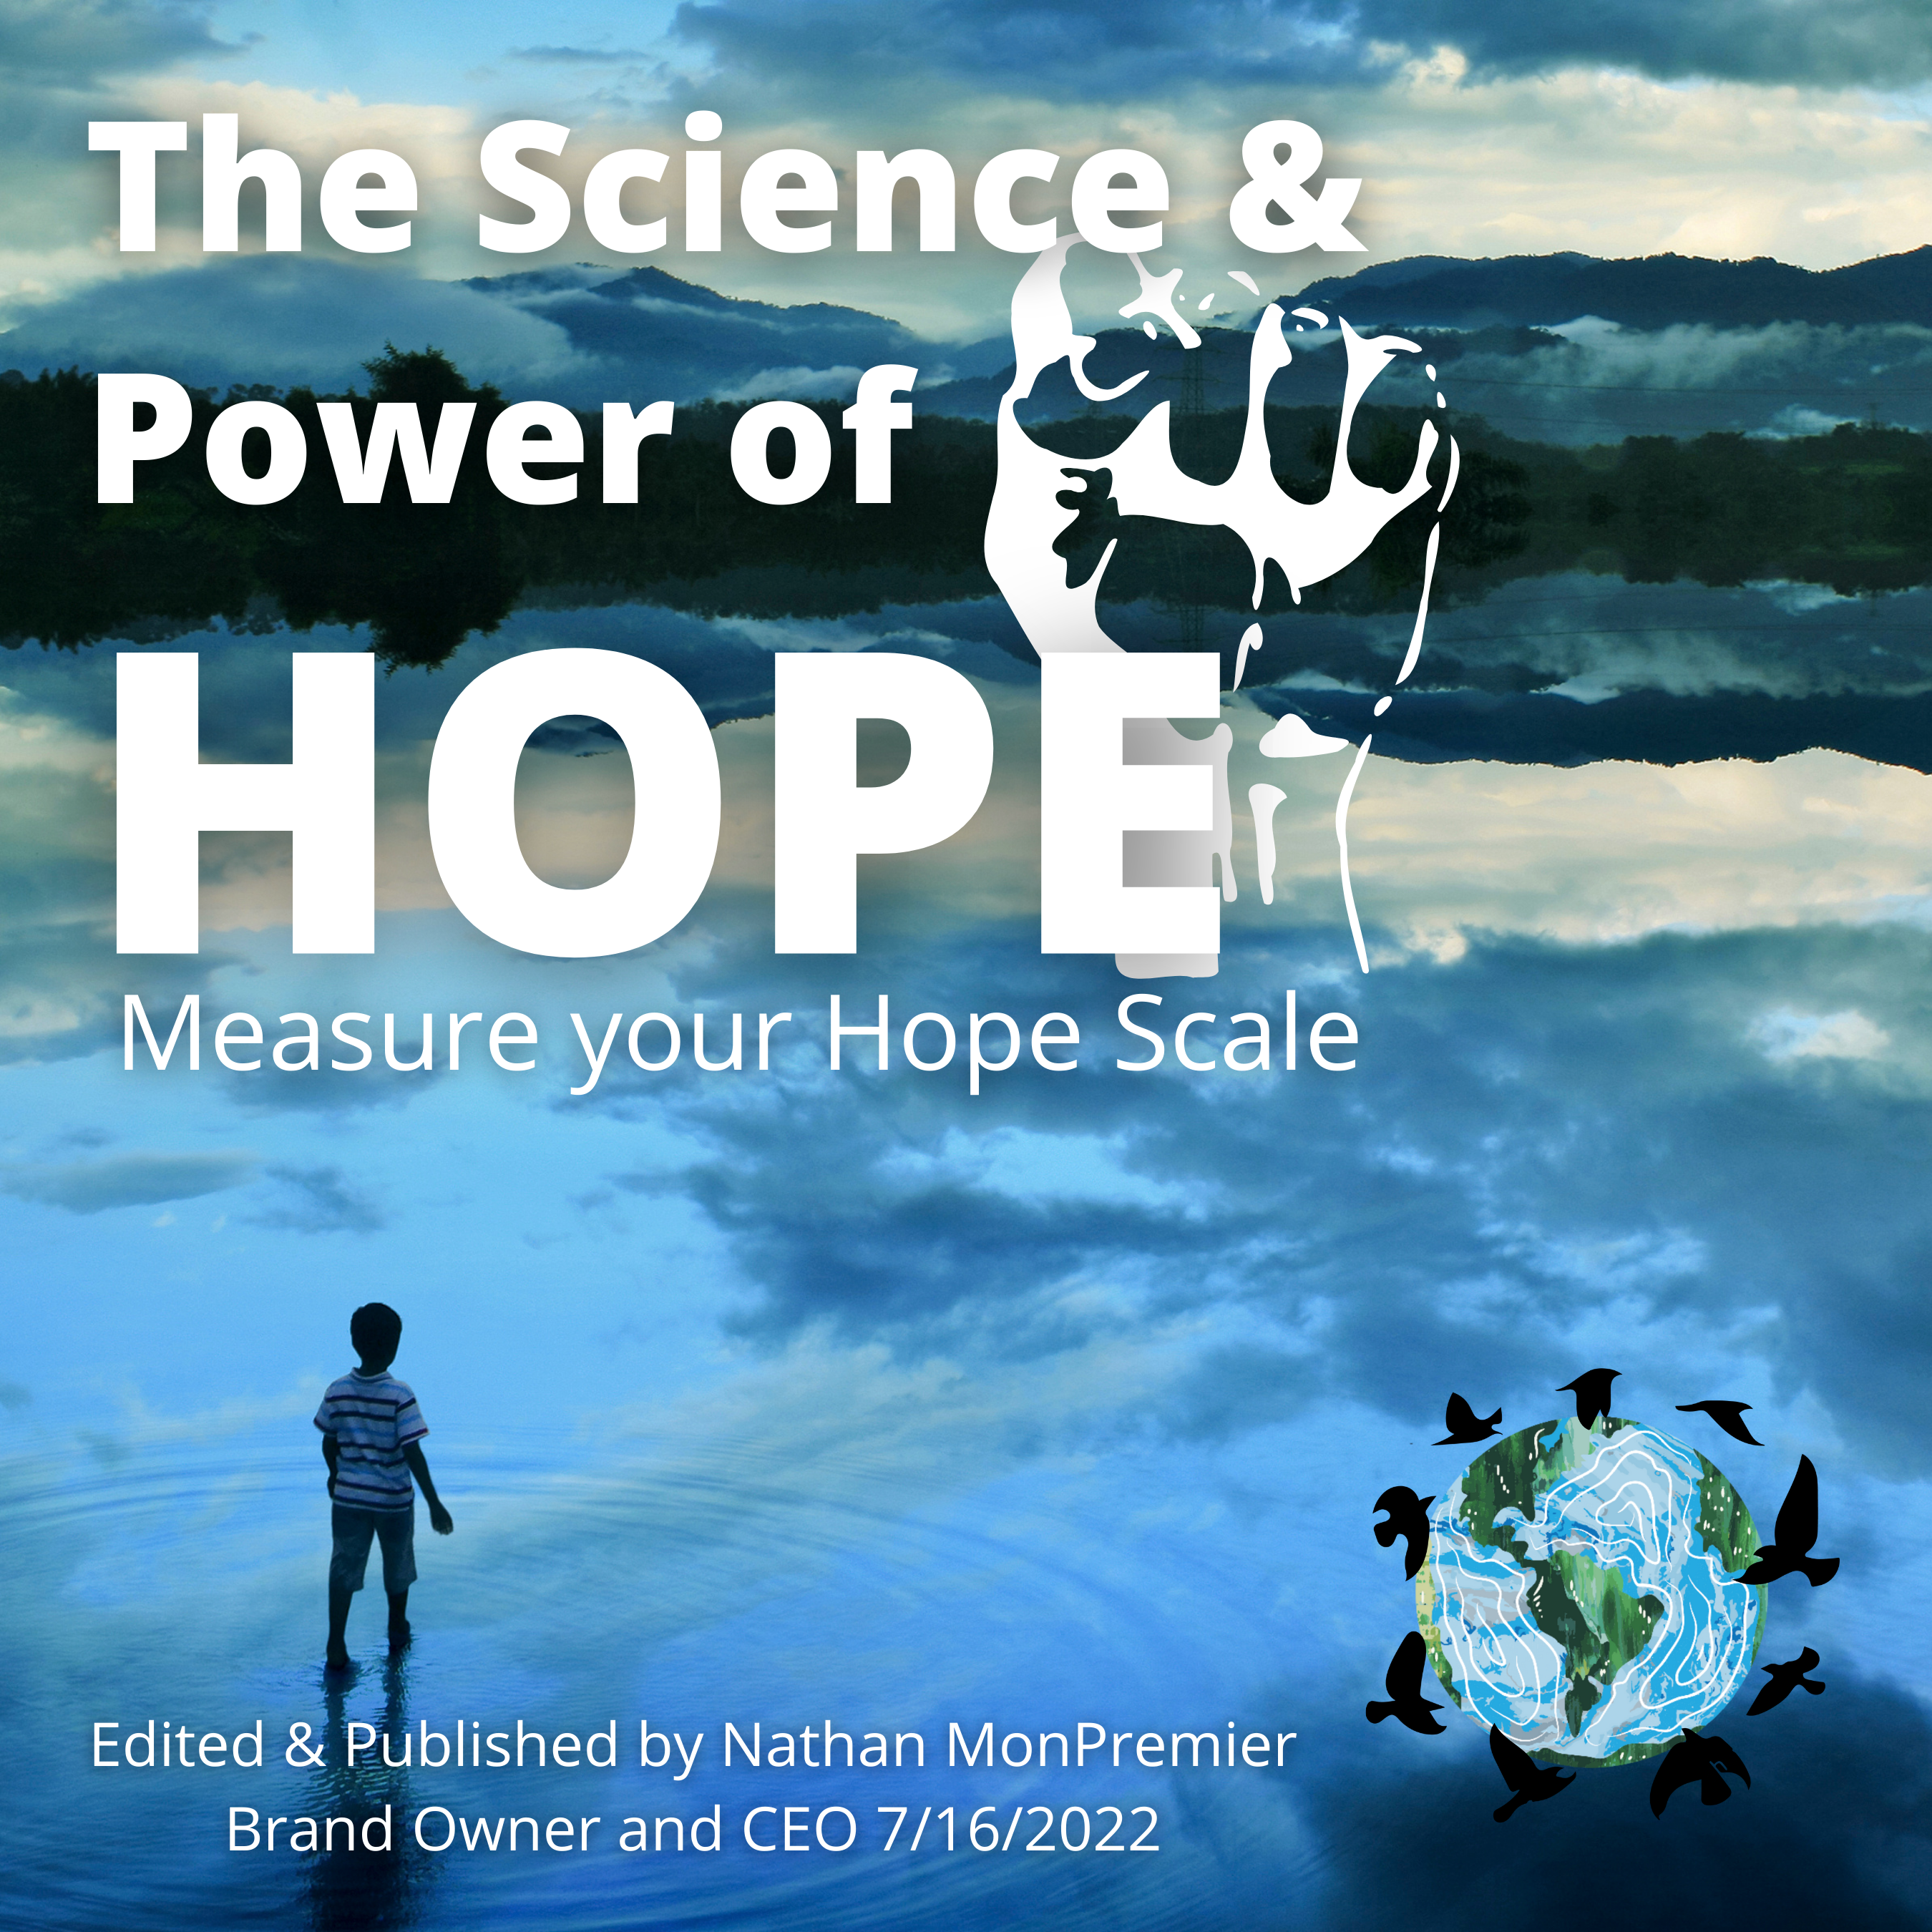 The Science & Power of Hope